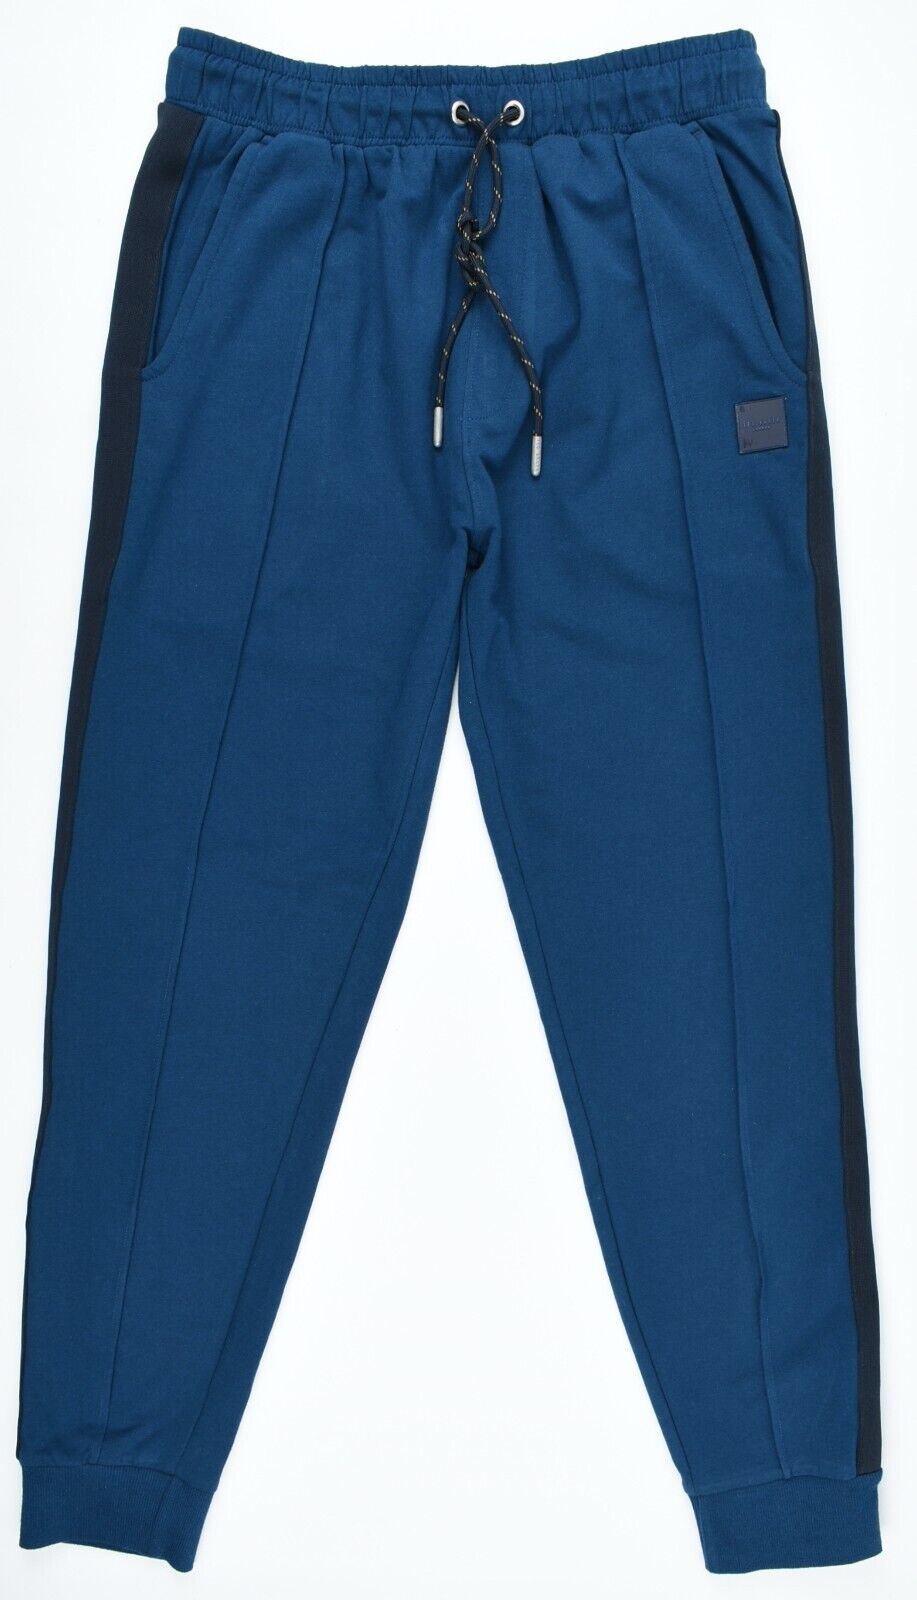 TED BAKER Men's French Terry Joggers, Lounge Pants, Gibralter Blue Ted size 3 /M